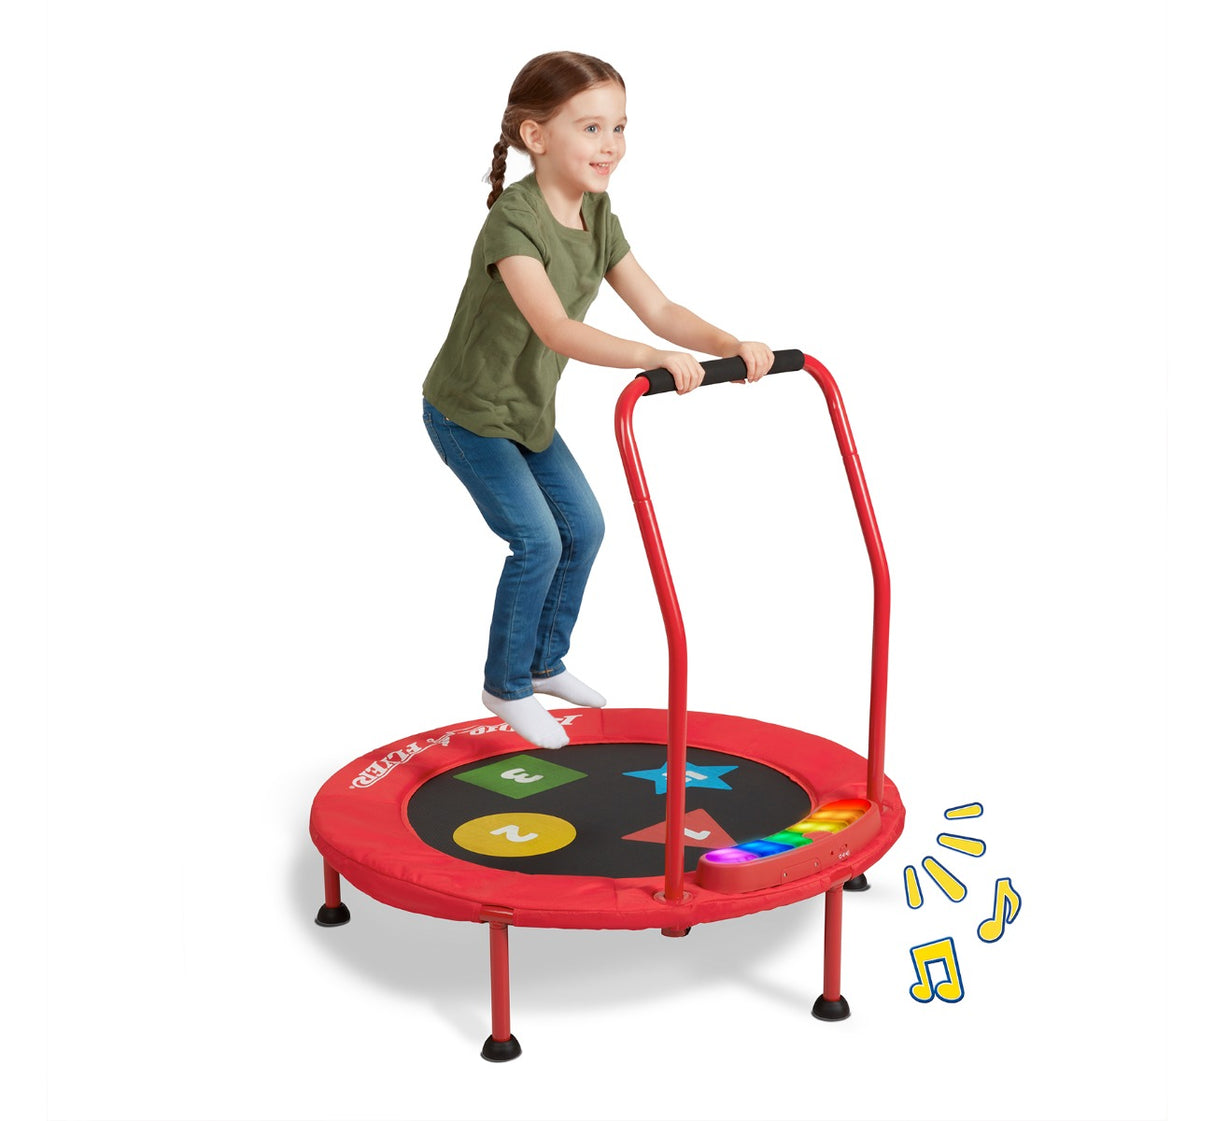 Game Time Interactive Kids' Trampoline with Lights & Sounds